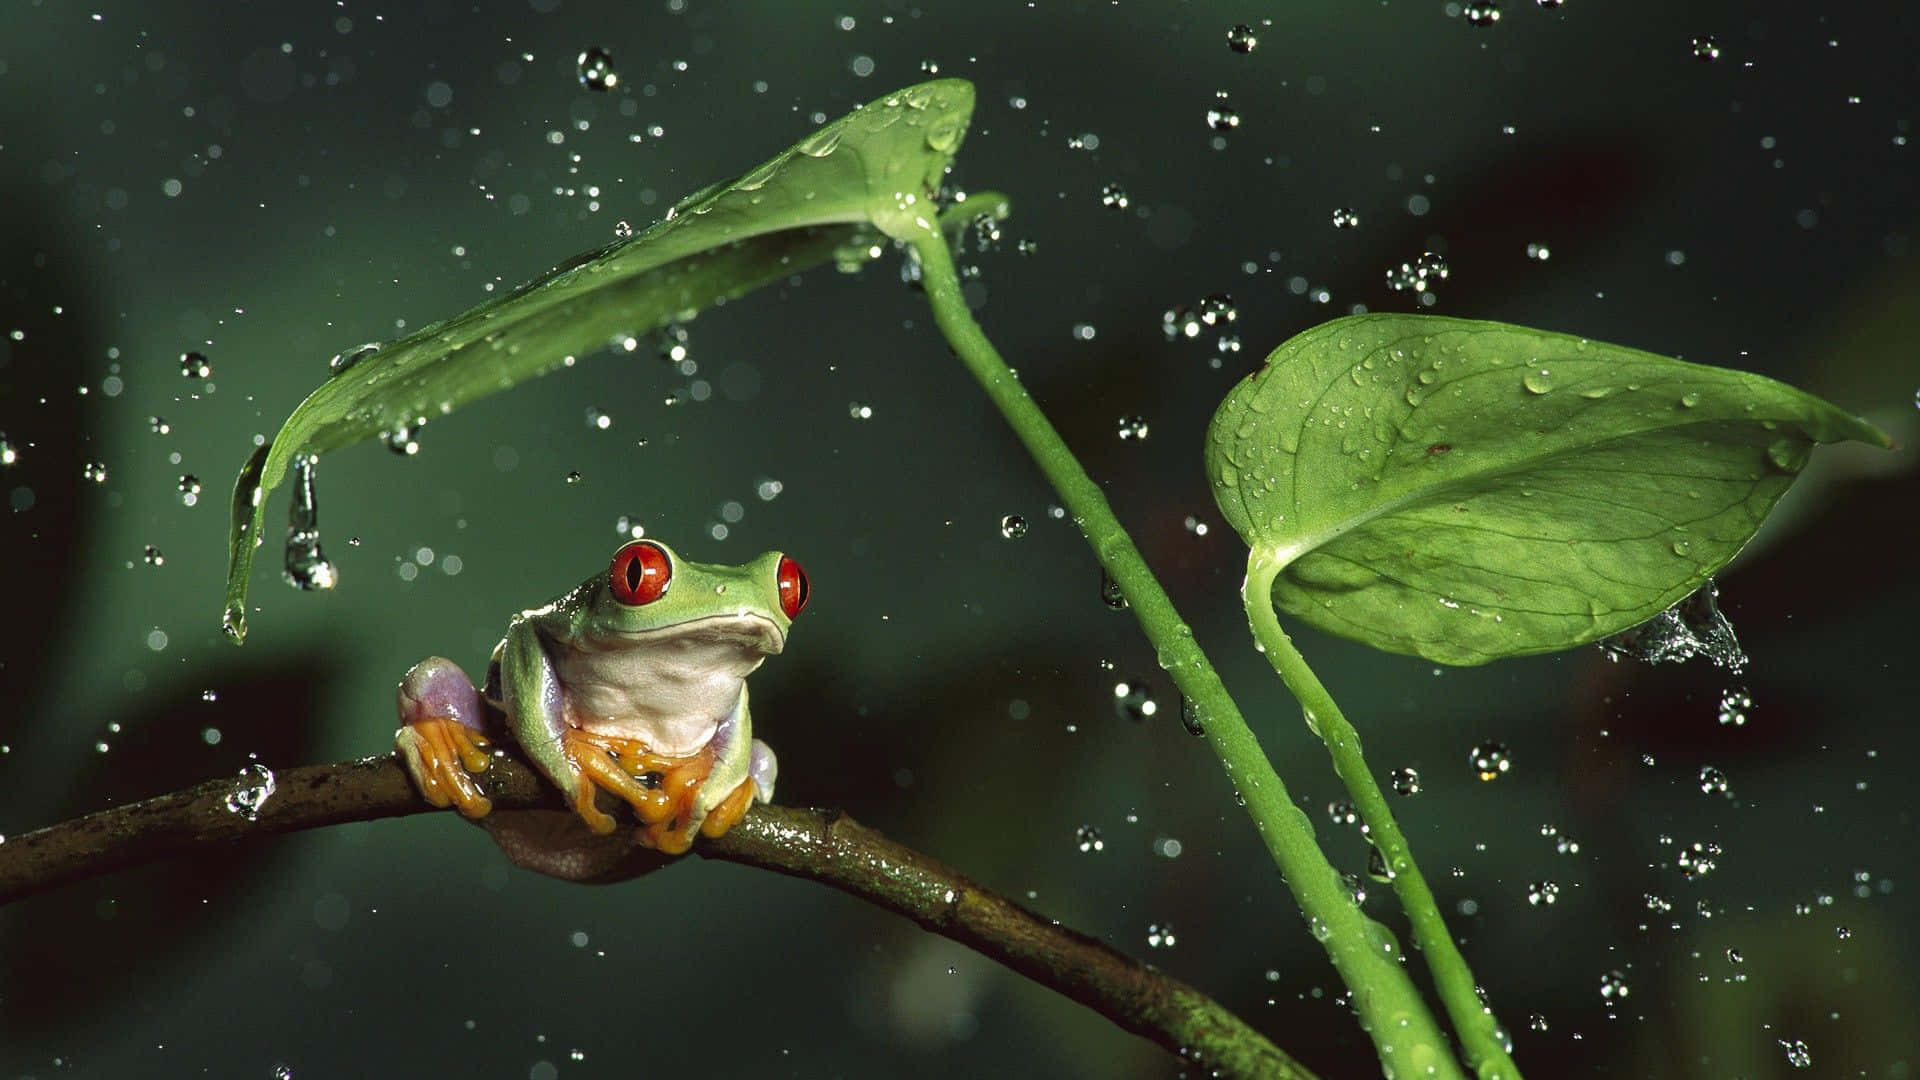 This cute frog is too adorable not to love